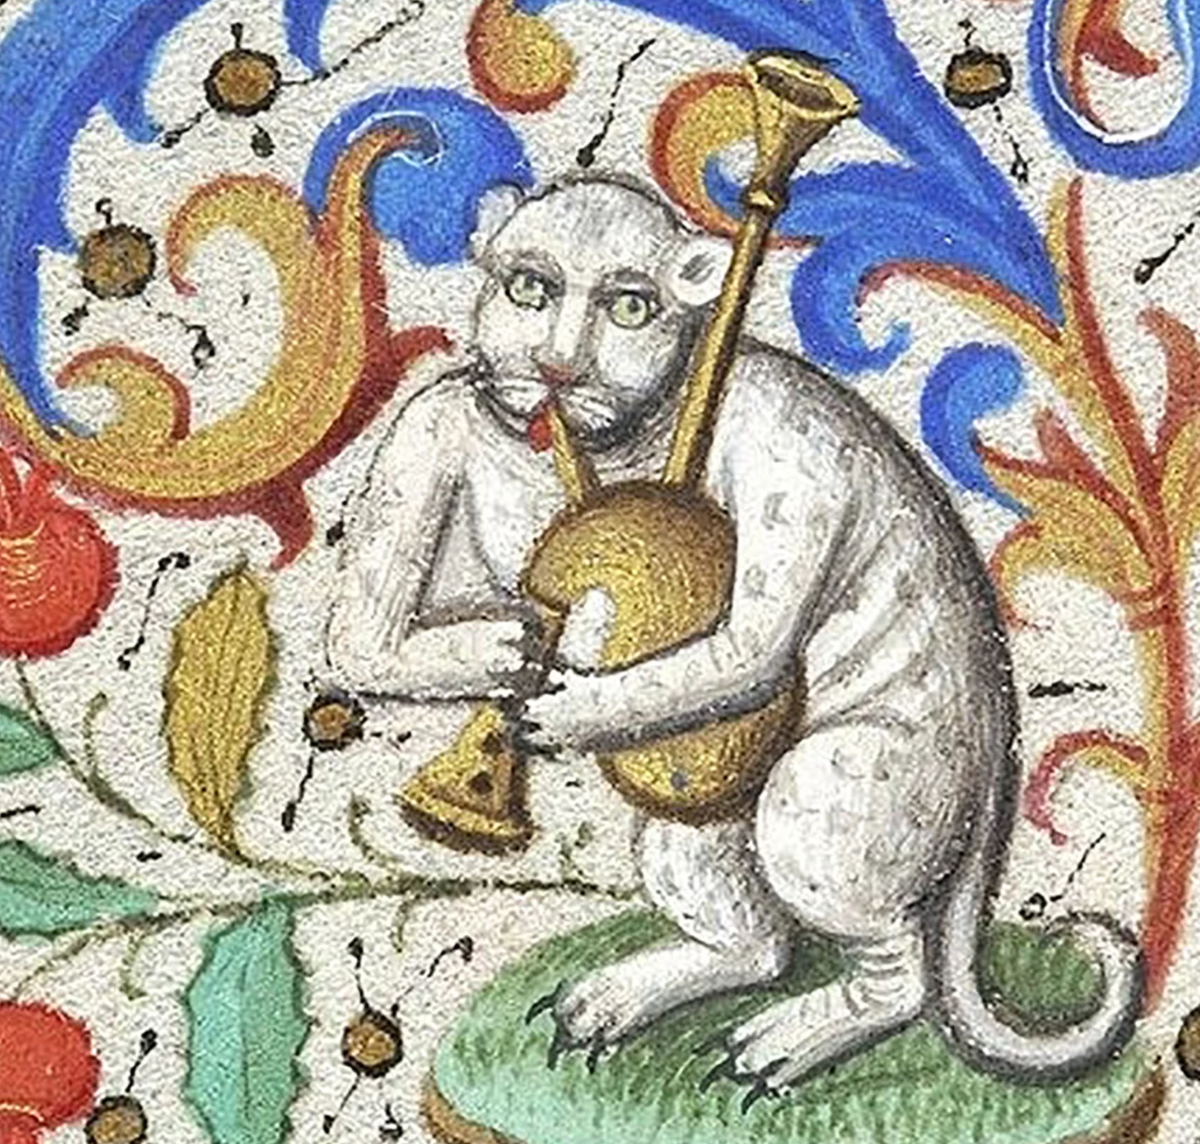 Why Do Cats Have Human Faces in Medieval Art?